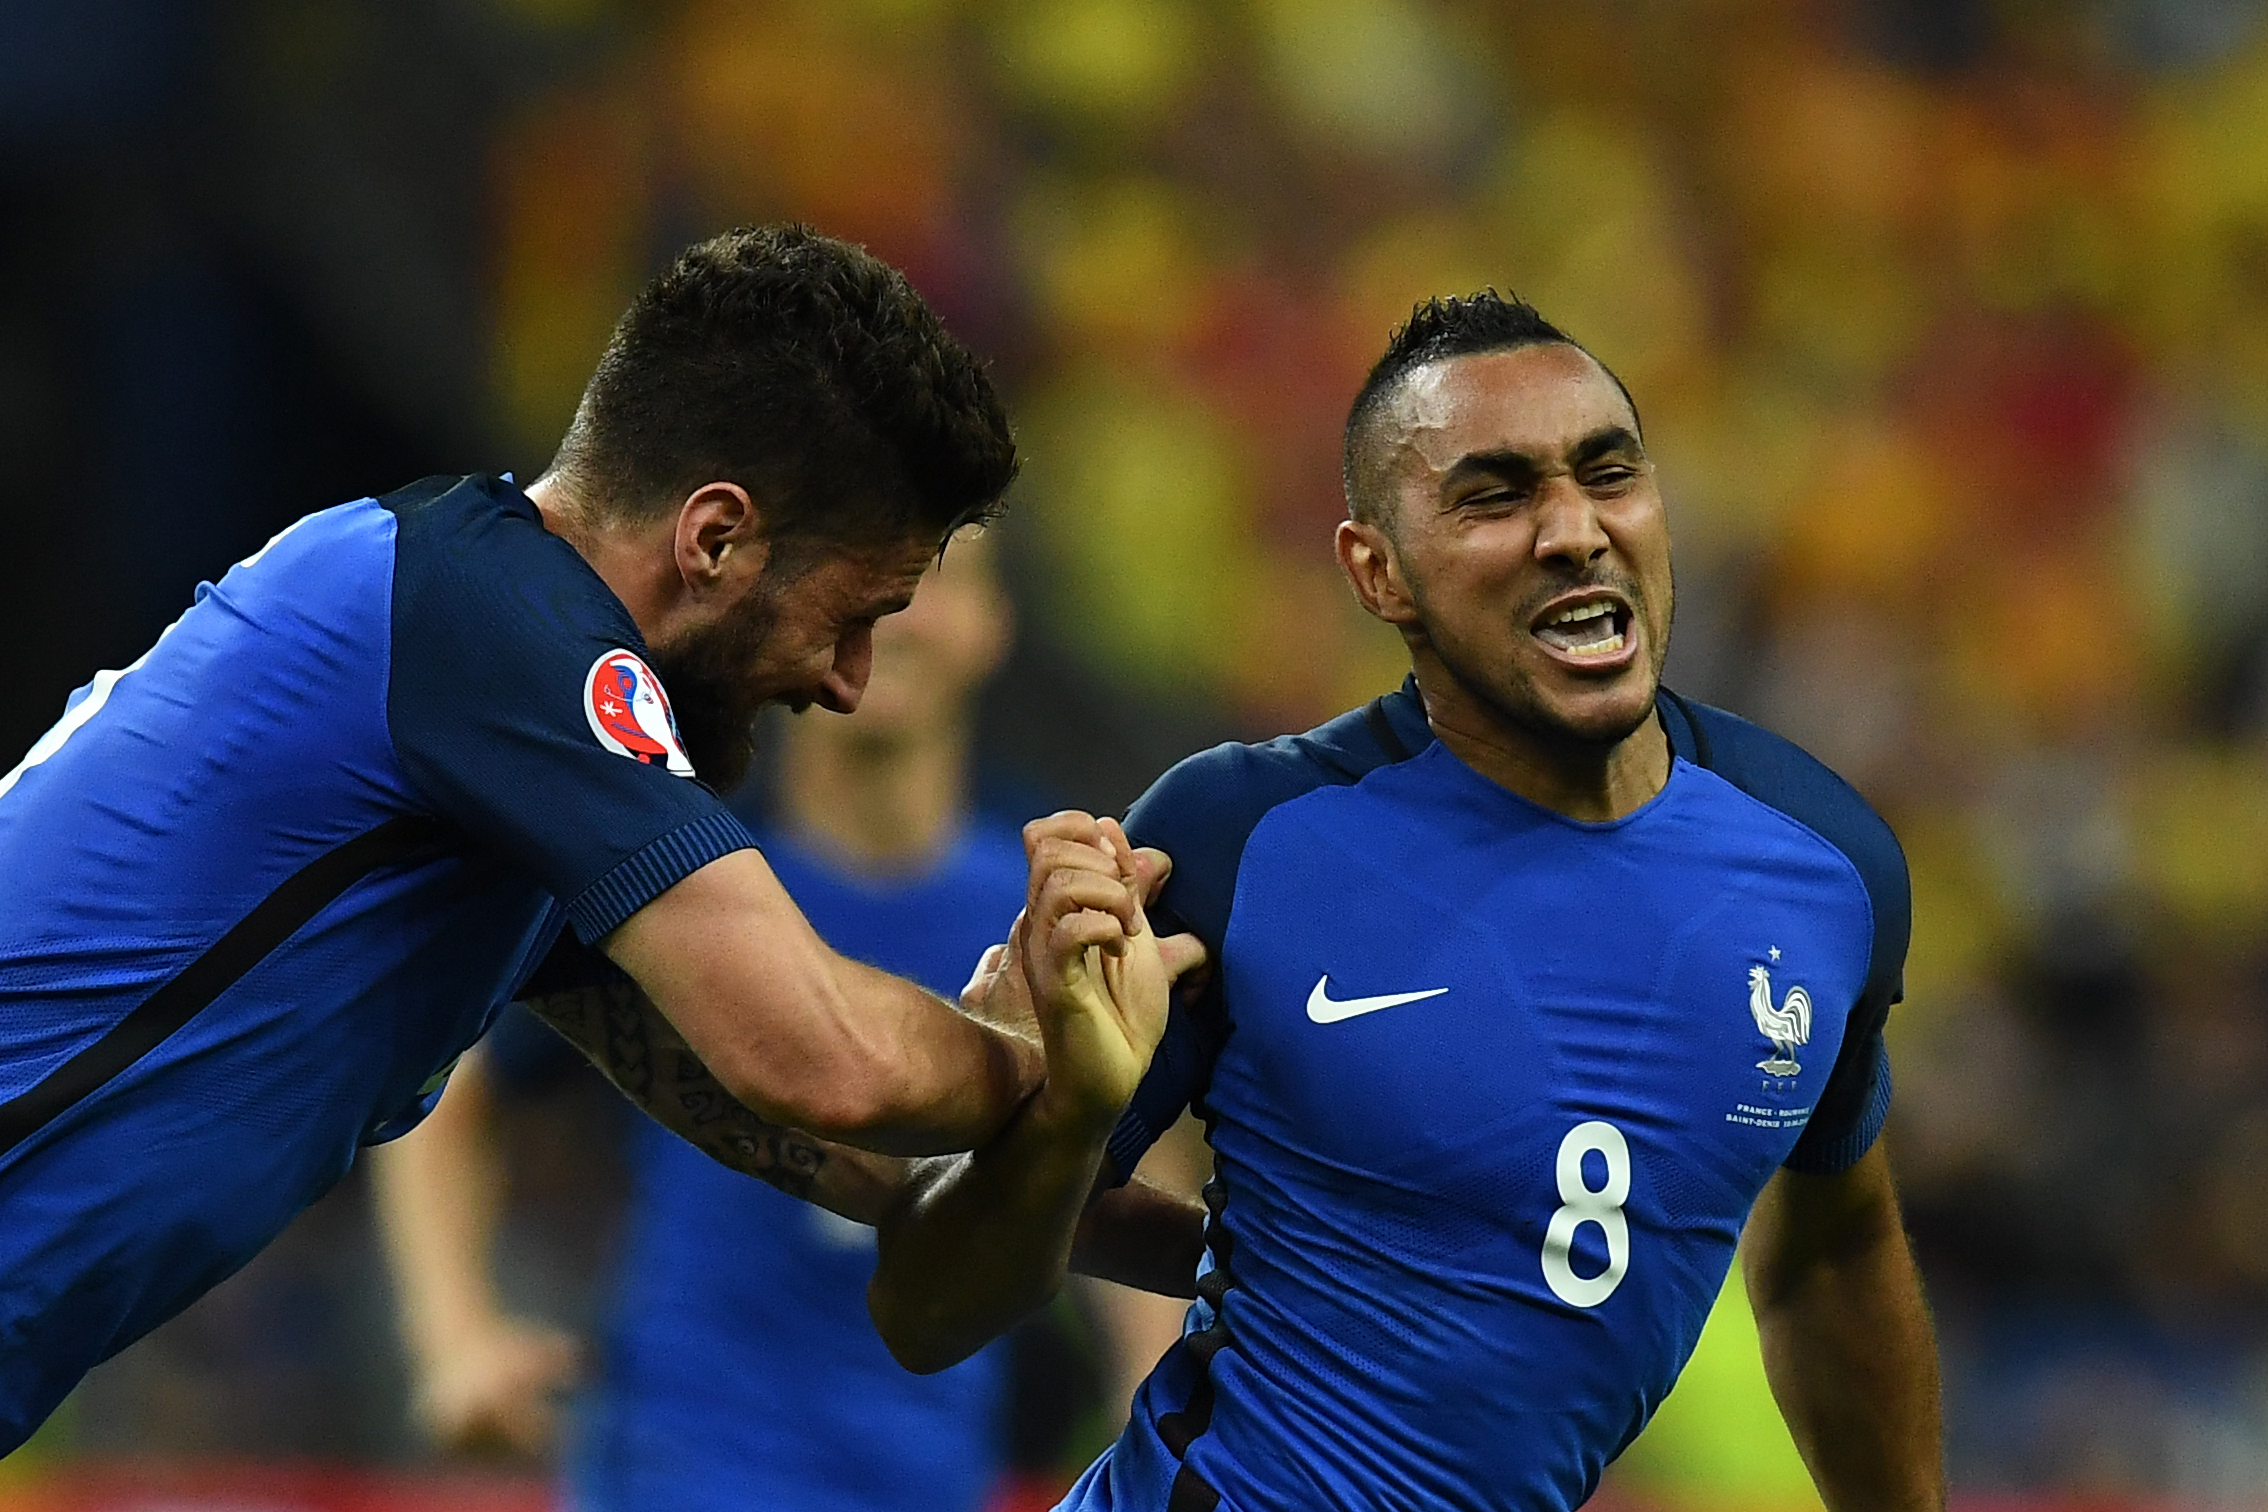 France's forward Dimitri Payet (R) celebrates with France's forward Olivier Giroud after scoring the 2-1 during the Euro 2016 group A football match between France and Romania at Stade de France, in Saint-Denis, north of Paris, on June 10, 2016. / AFP / FRANCK FIFE        (Photo credit should read FRANCK FIFE/AFP/Getty Images)